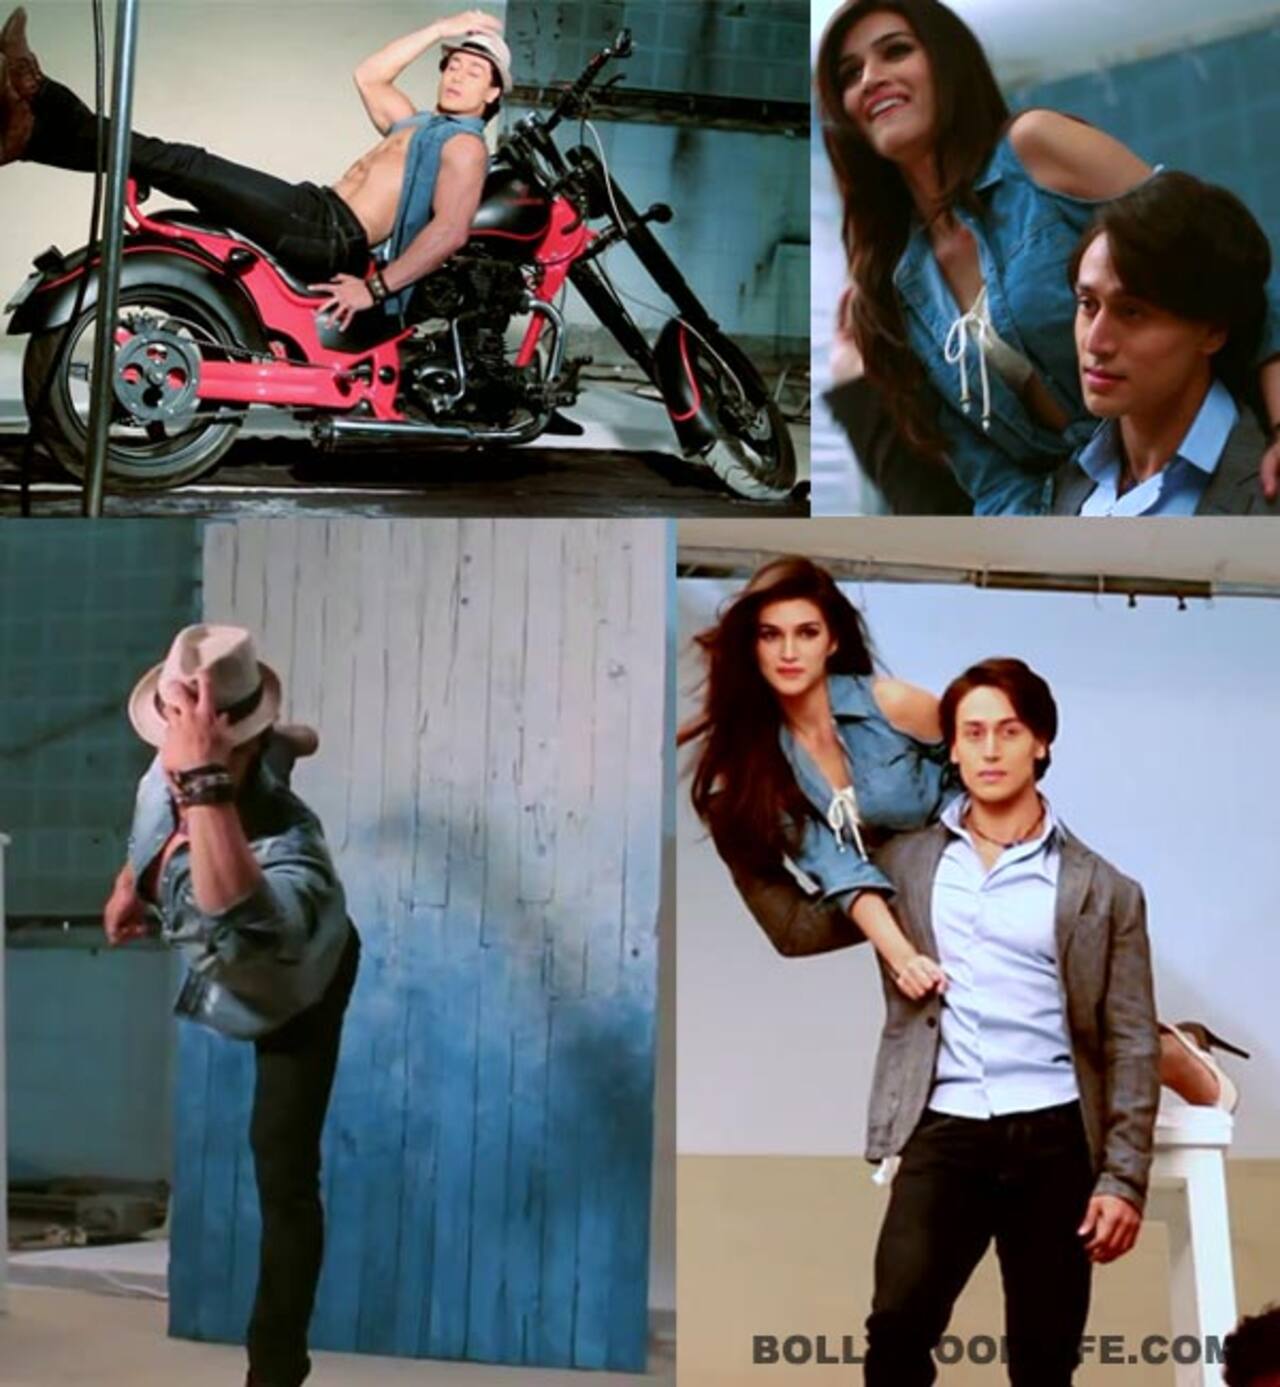 Tiger Shroff's sexy, fun and naughty side revealed - watch Heropanti behind the scenes!